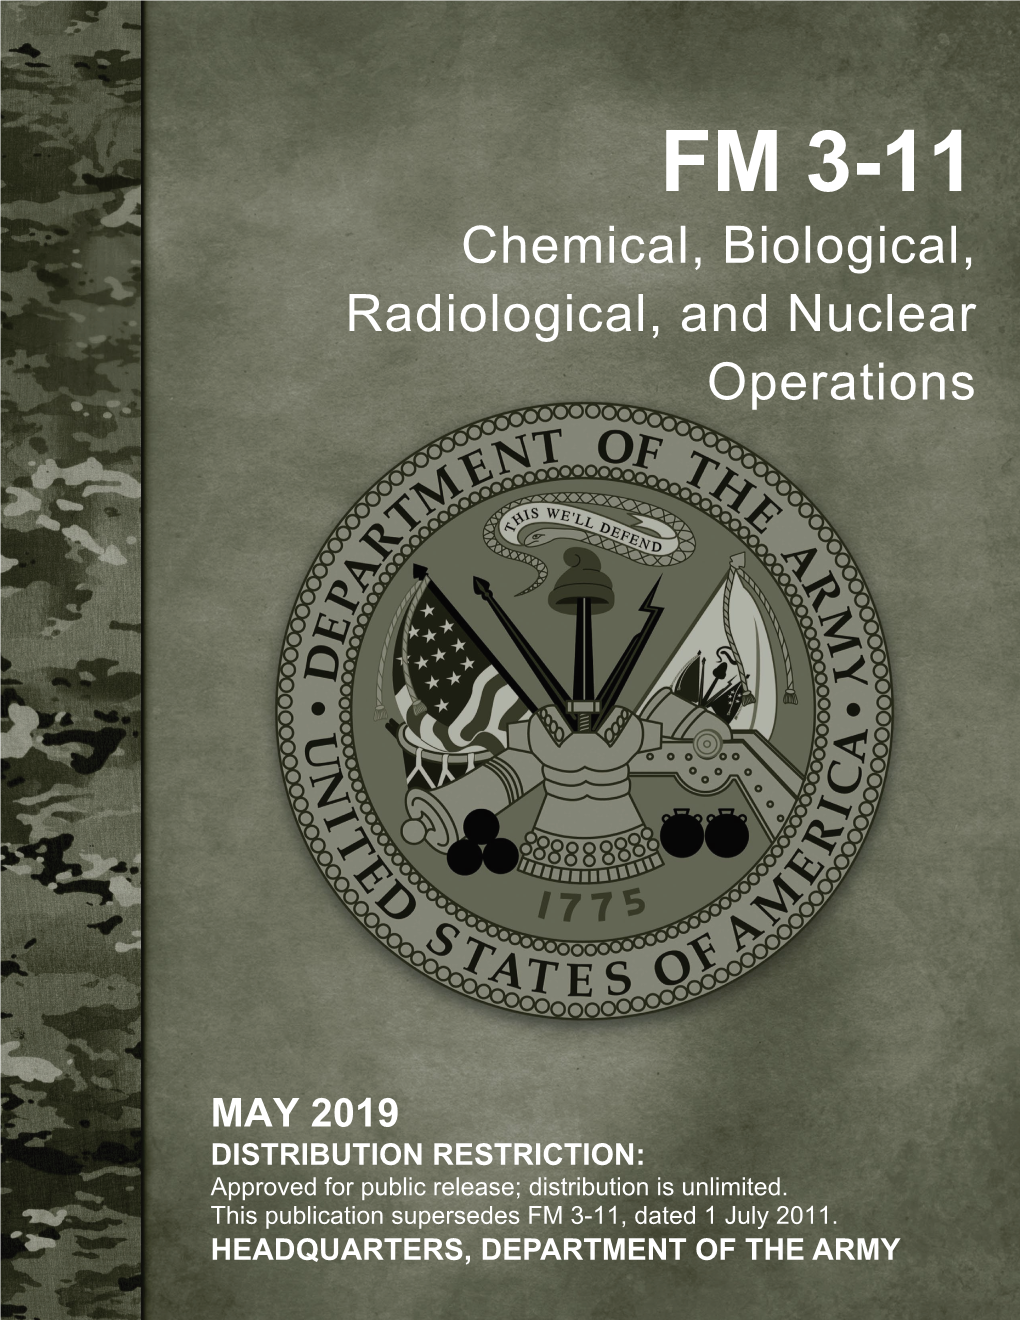 FM 3-11. Chemical, Biological, Radiological and Nuclear Operations